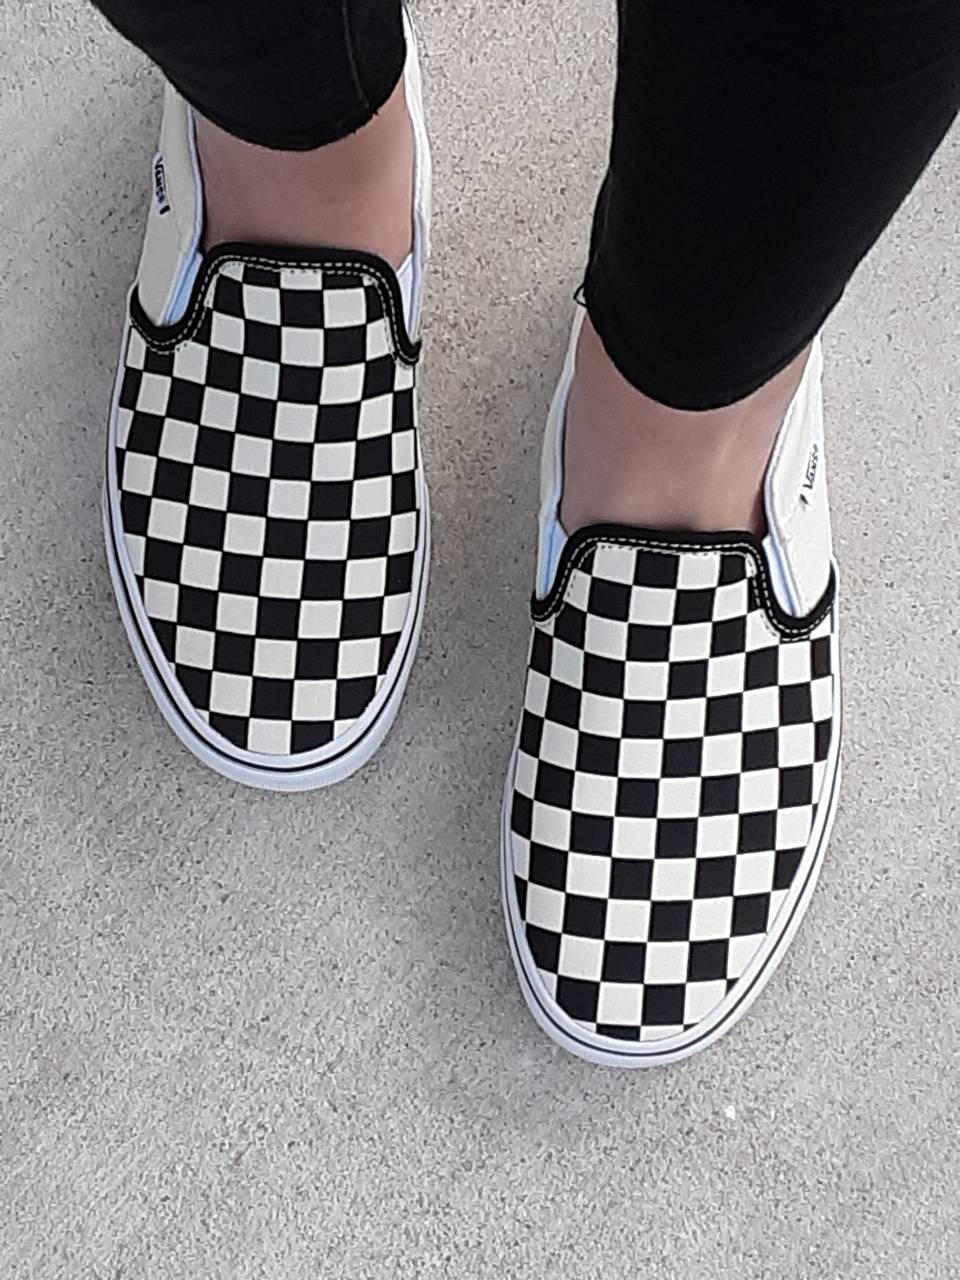 Checkered Vans Wallpapers - 4k, HD Checkered Vans Backgrounds on ...